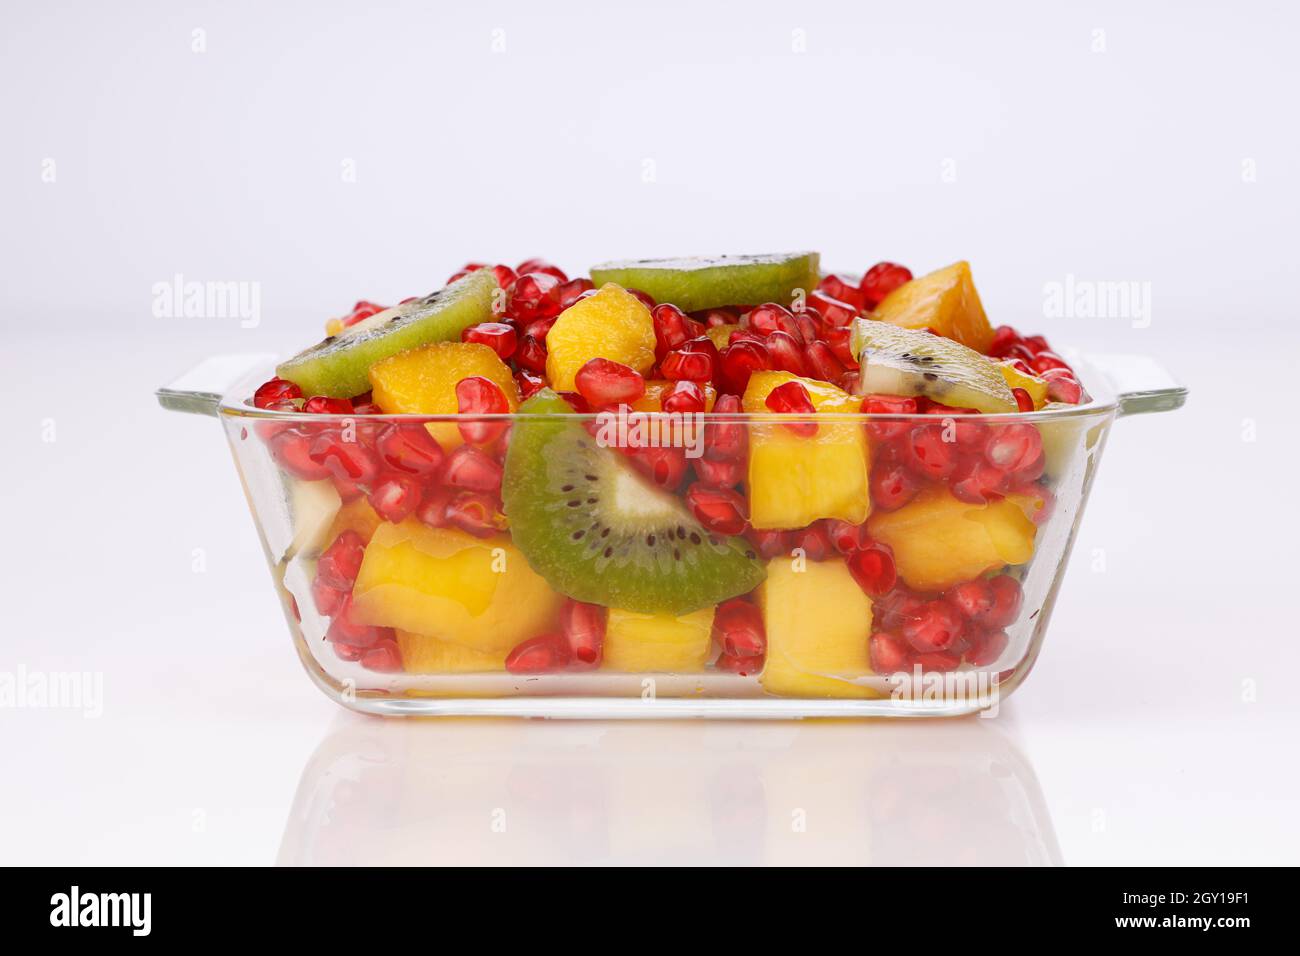 Mixed cut fruits arranged in a transparent glass bowl  with white background, isolated. Stock Photo